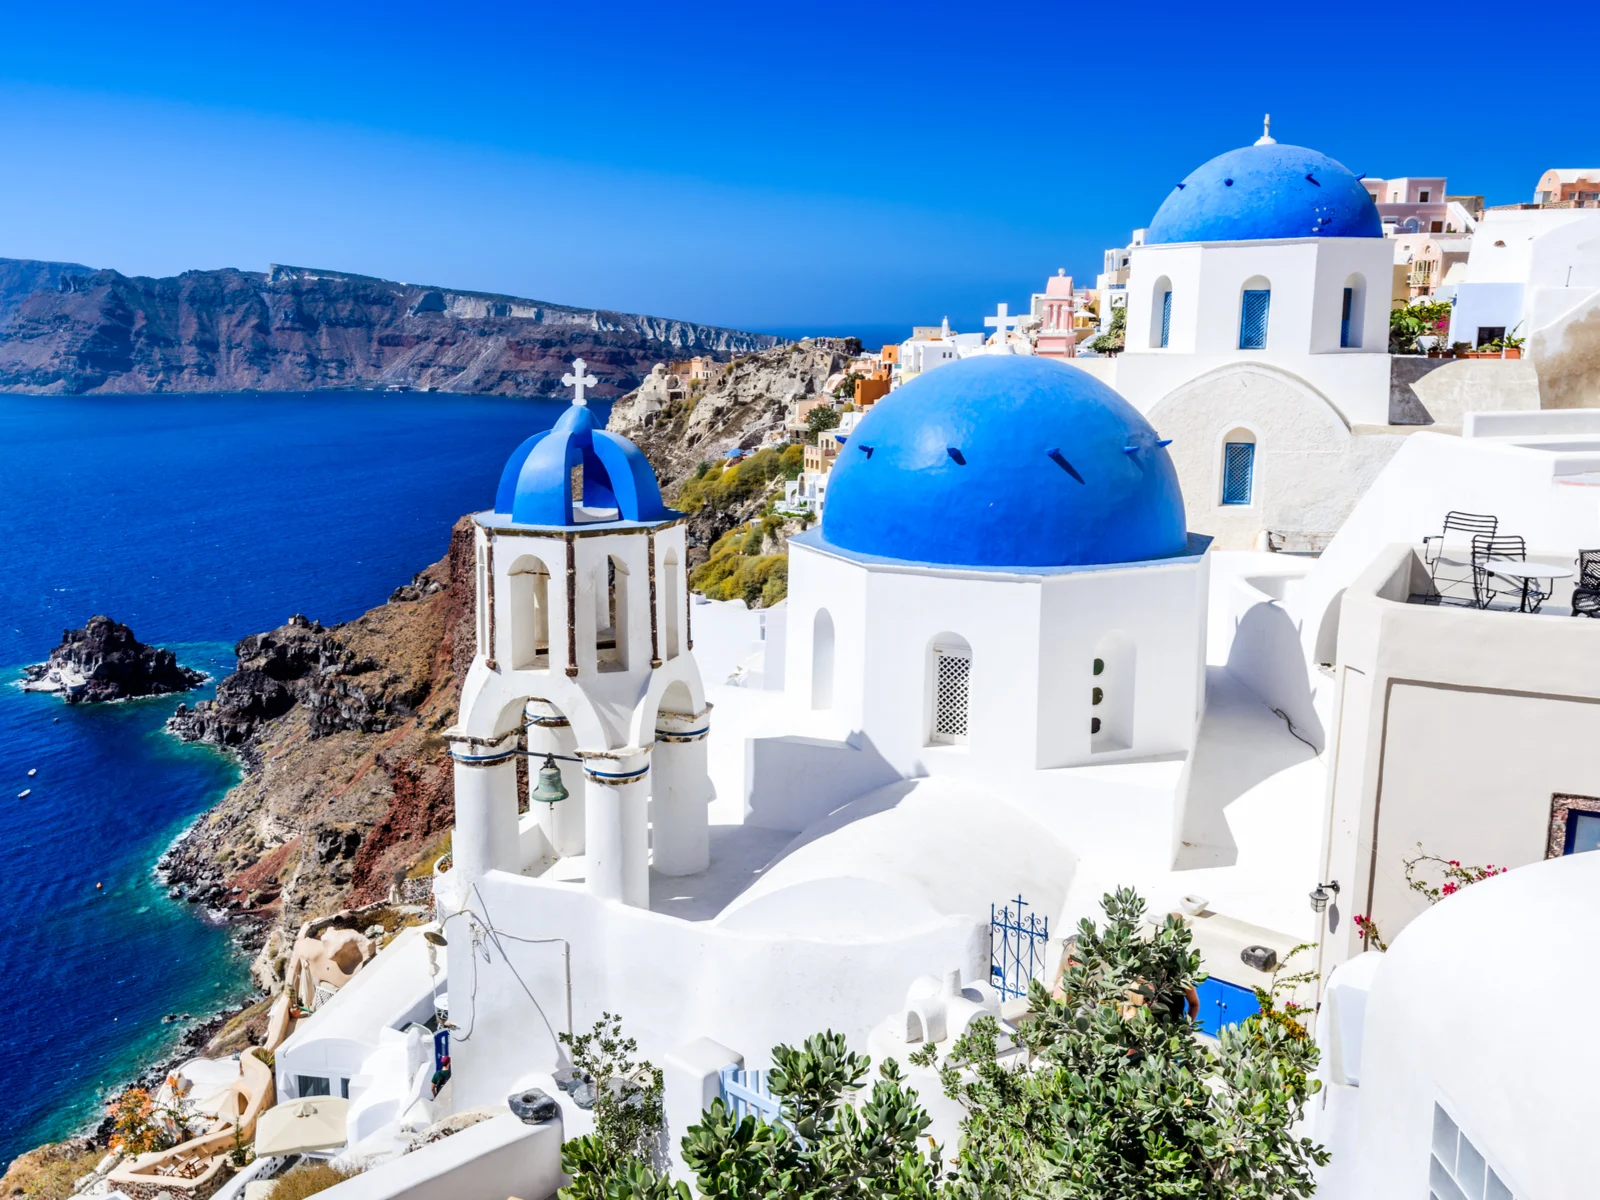 one of the best things to do in Santorini, to visit a blue-domed church